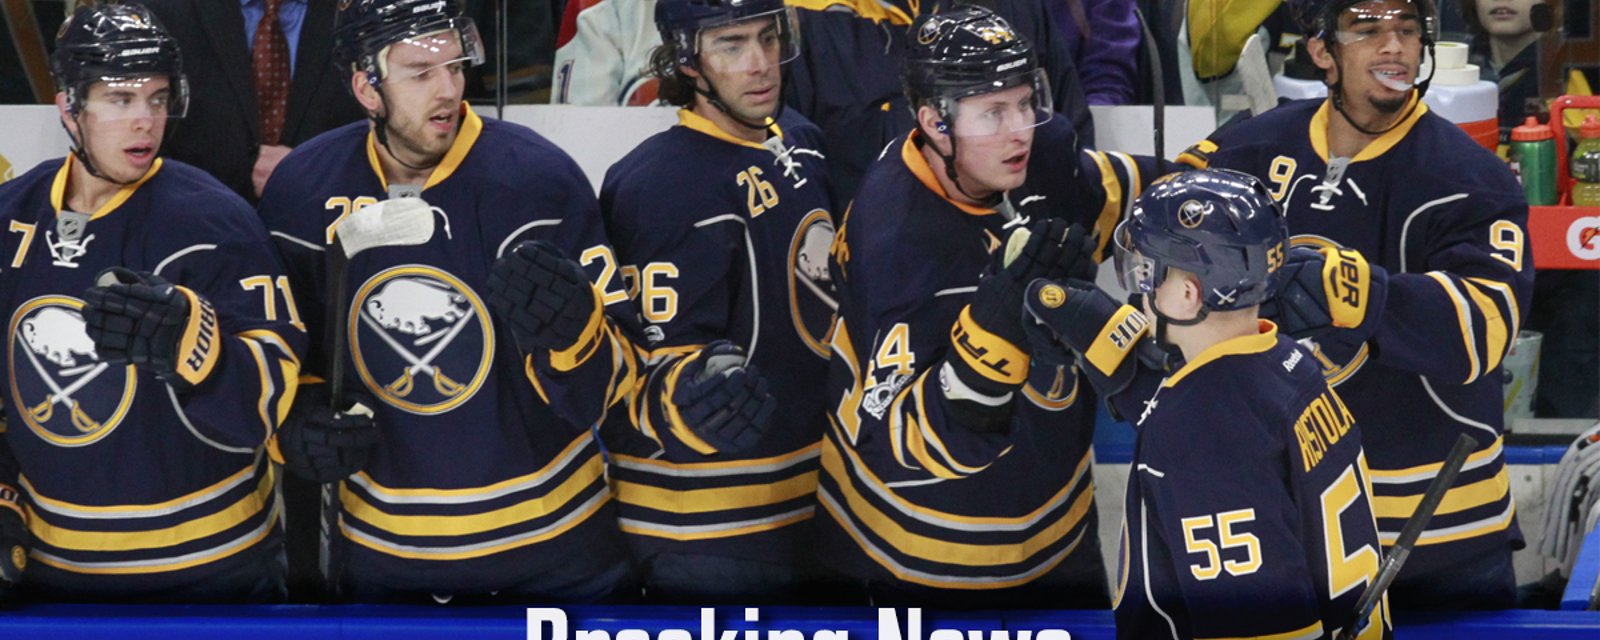 BREAKING: Buffalo Sabres have signed forward to a two-year contract.